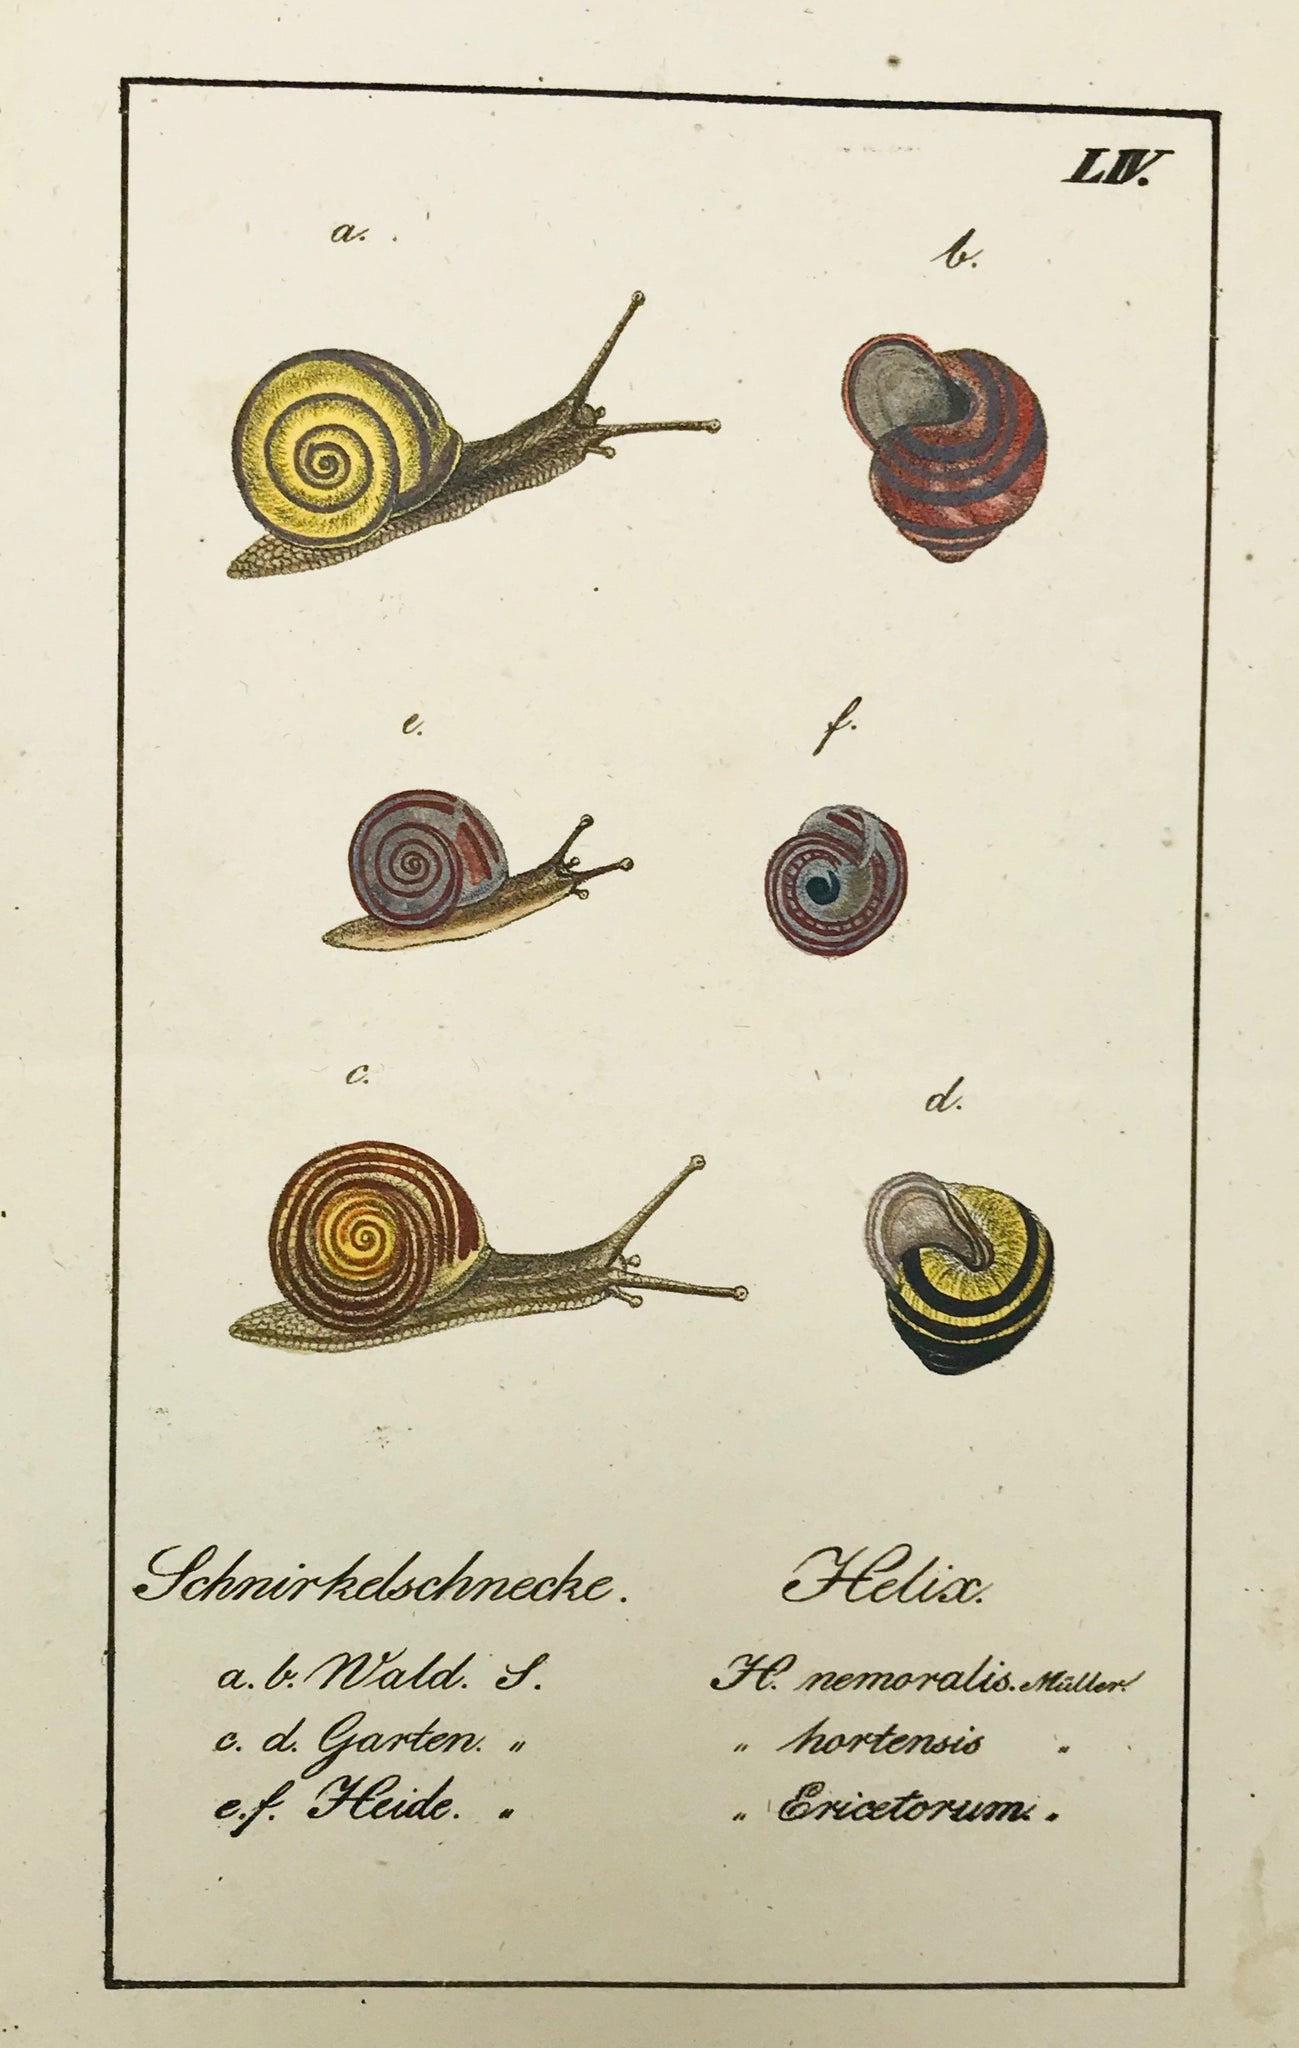 Schnirkelschnecke Helix  Copper engraving ca 1800. Original hand coloring. Hardly visible horizontal fold.  18.5 x 10.5 cm ( 7.3 x 4.2 ")